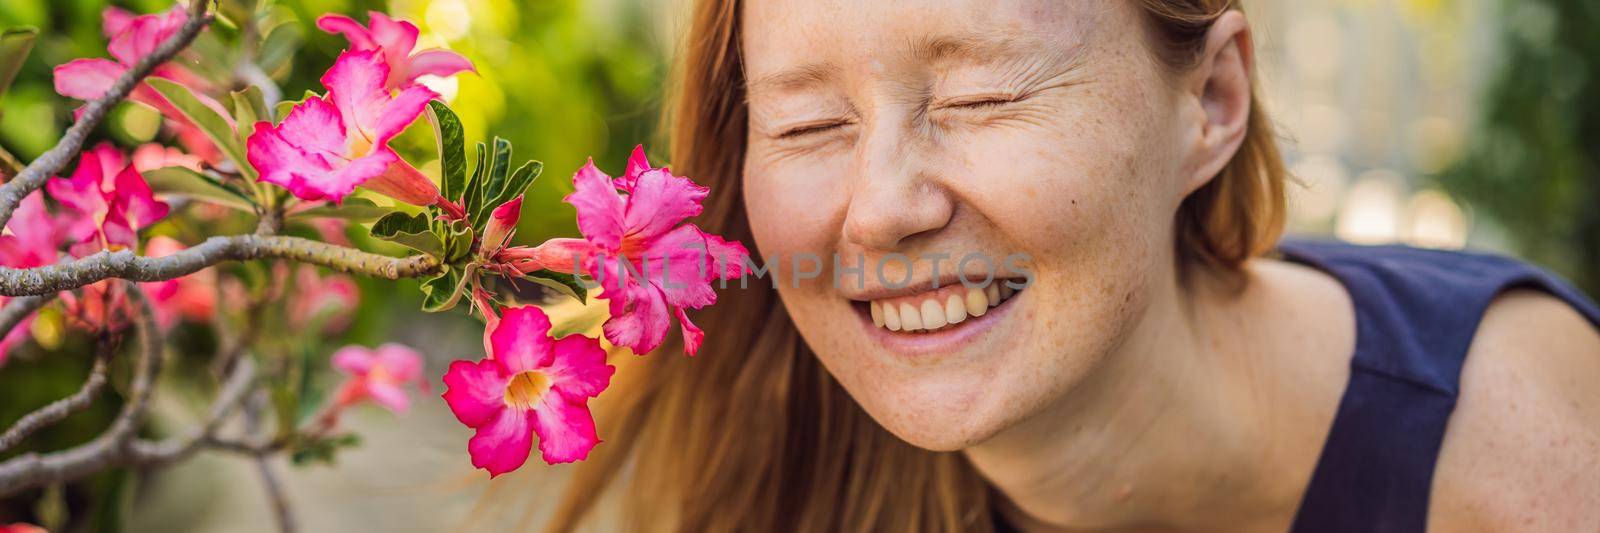 I love my skin. A young woman with freckles, moles, scars and facial wrinkles loves her skin, enjoys life and walks in a beautiful park BANNER, LONG FORMAT by galitskaya